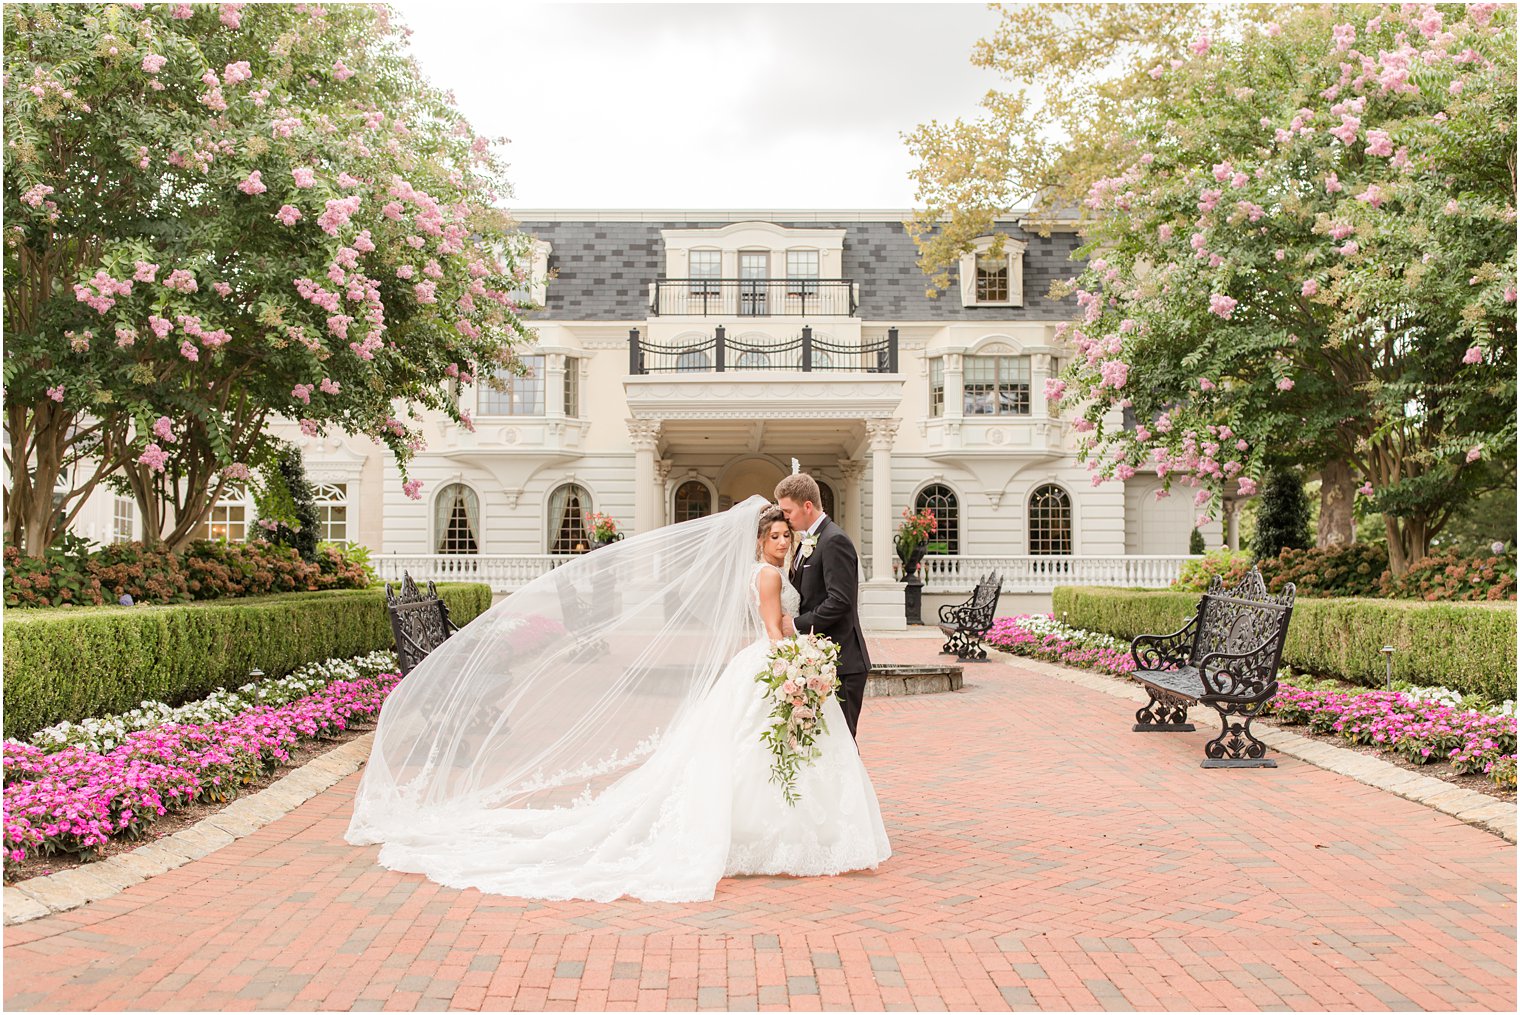 groom kisses bride's forehead with her veil floating behind them at Ashford Estate